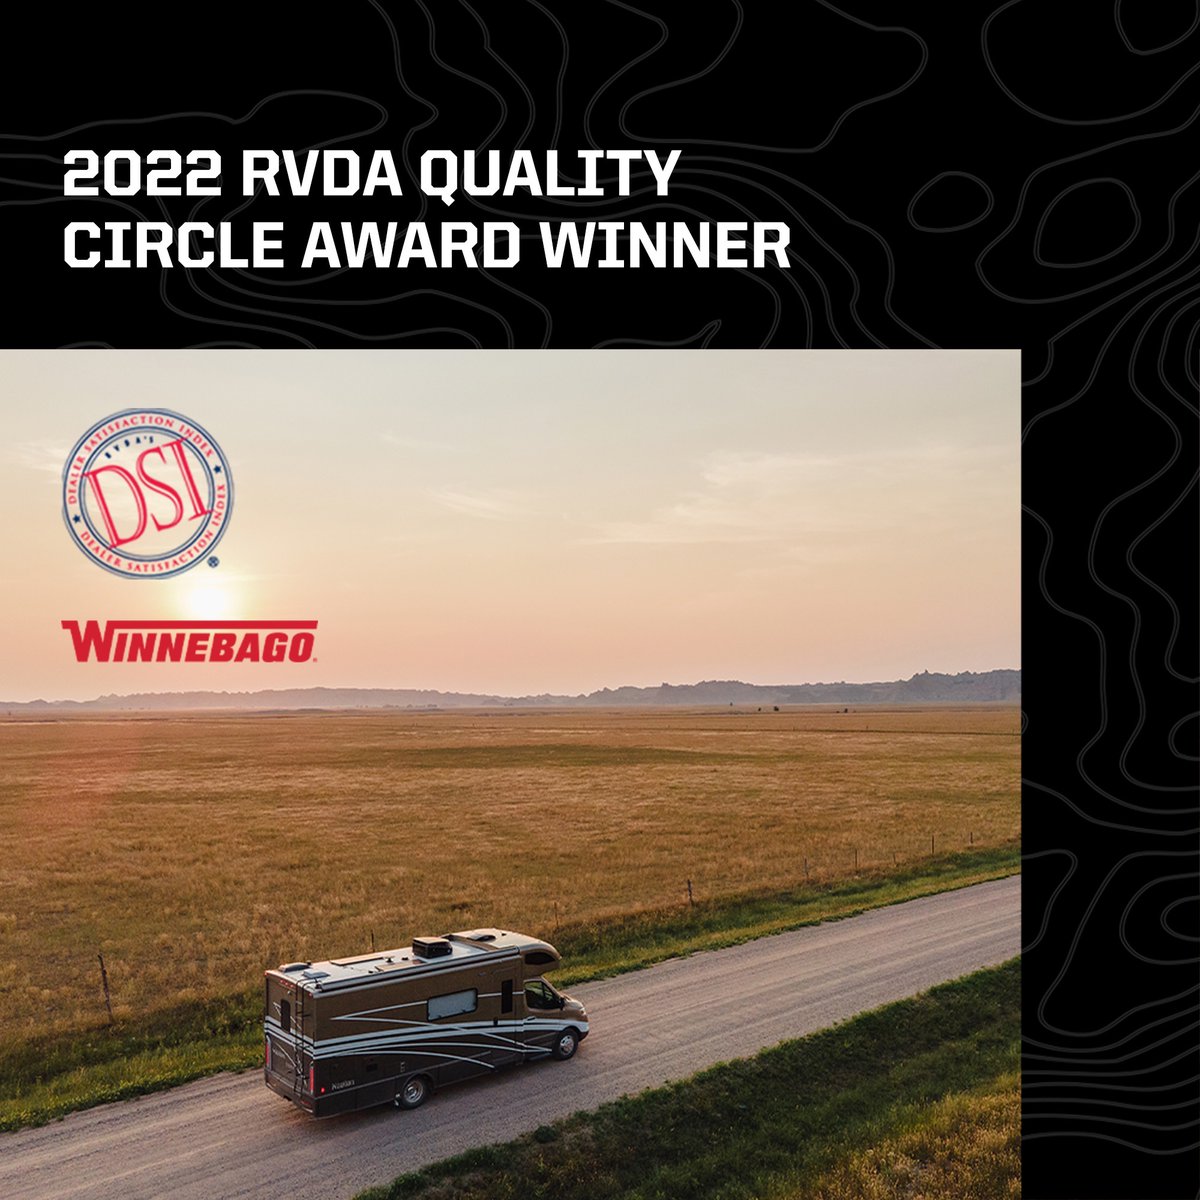 We are honored to be among the list of RV manufacturers receiving @RVDAofNA Quality Circle Awards for 2022! The awards are based on the DSI survey, measuring dealers’ overall satisfaction with whom they do business. bit.ly/3MvaaWg